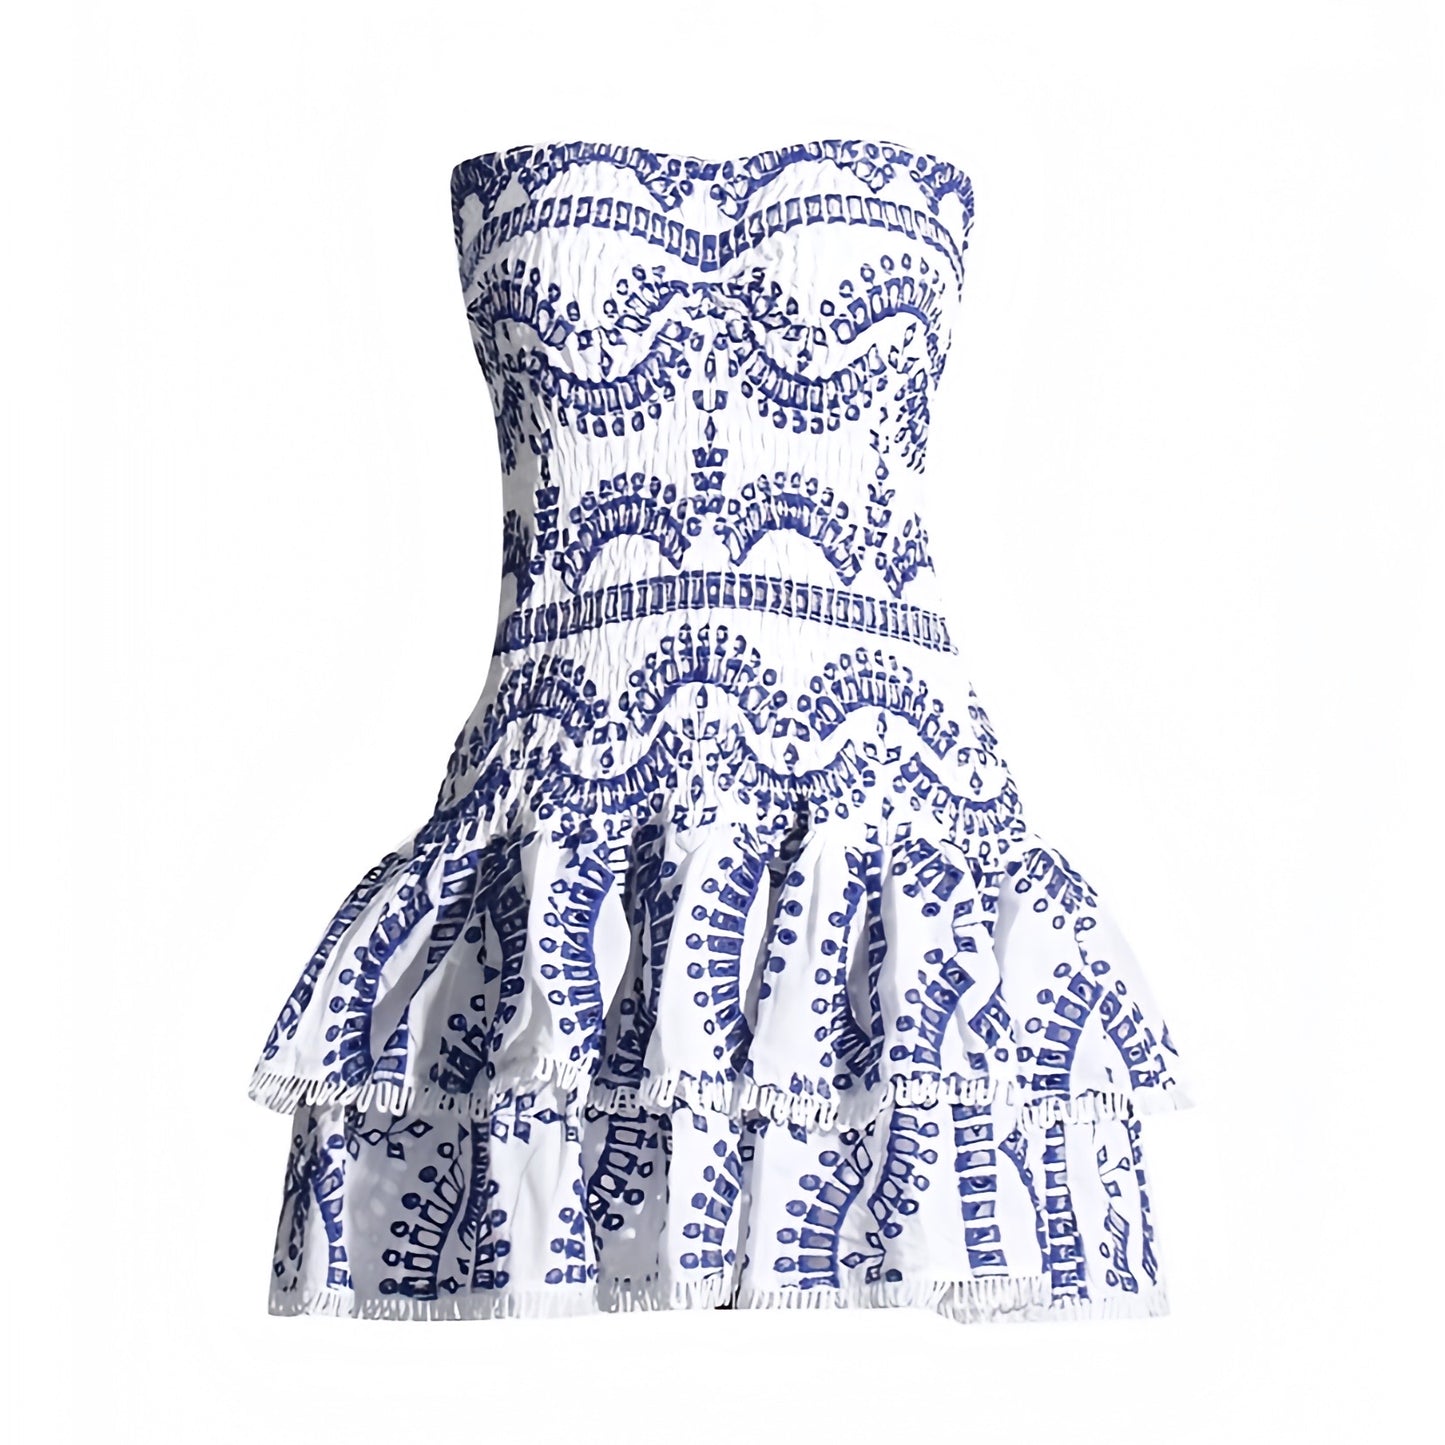 dark-blue-and-white-eyelet-embroidered-striped-scalloped-anglaise-patterned-layered-ruffle-slim-fit-bodycon-fitted-bodice-shirred-tiered-boho-drop-waist-strapless-smocked-sleeveless-bandeau-short-mini-dress-couture-women-ladies-chic-trendy-spring-2024-summer-elegant-semi-formal-casual-classy-feminine-prom-party-gala-debutante-preppy-style-coastal-granddaughter-tropical-greece-european-vacation-beach-wear-mamma-mia-sundress-revolve-charo-ruiz-loveshackfancy-zimmerman-altard-state-dupe